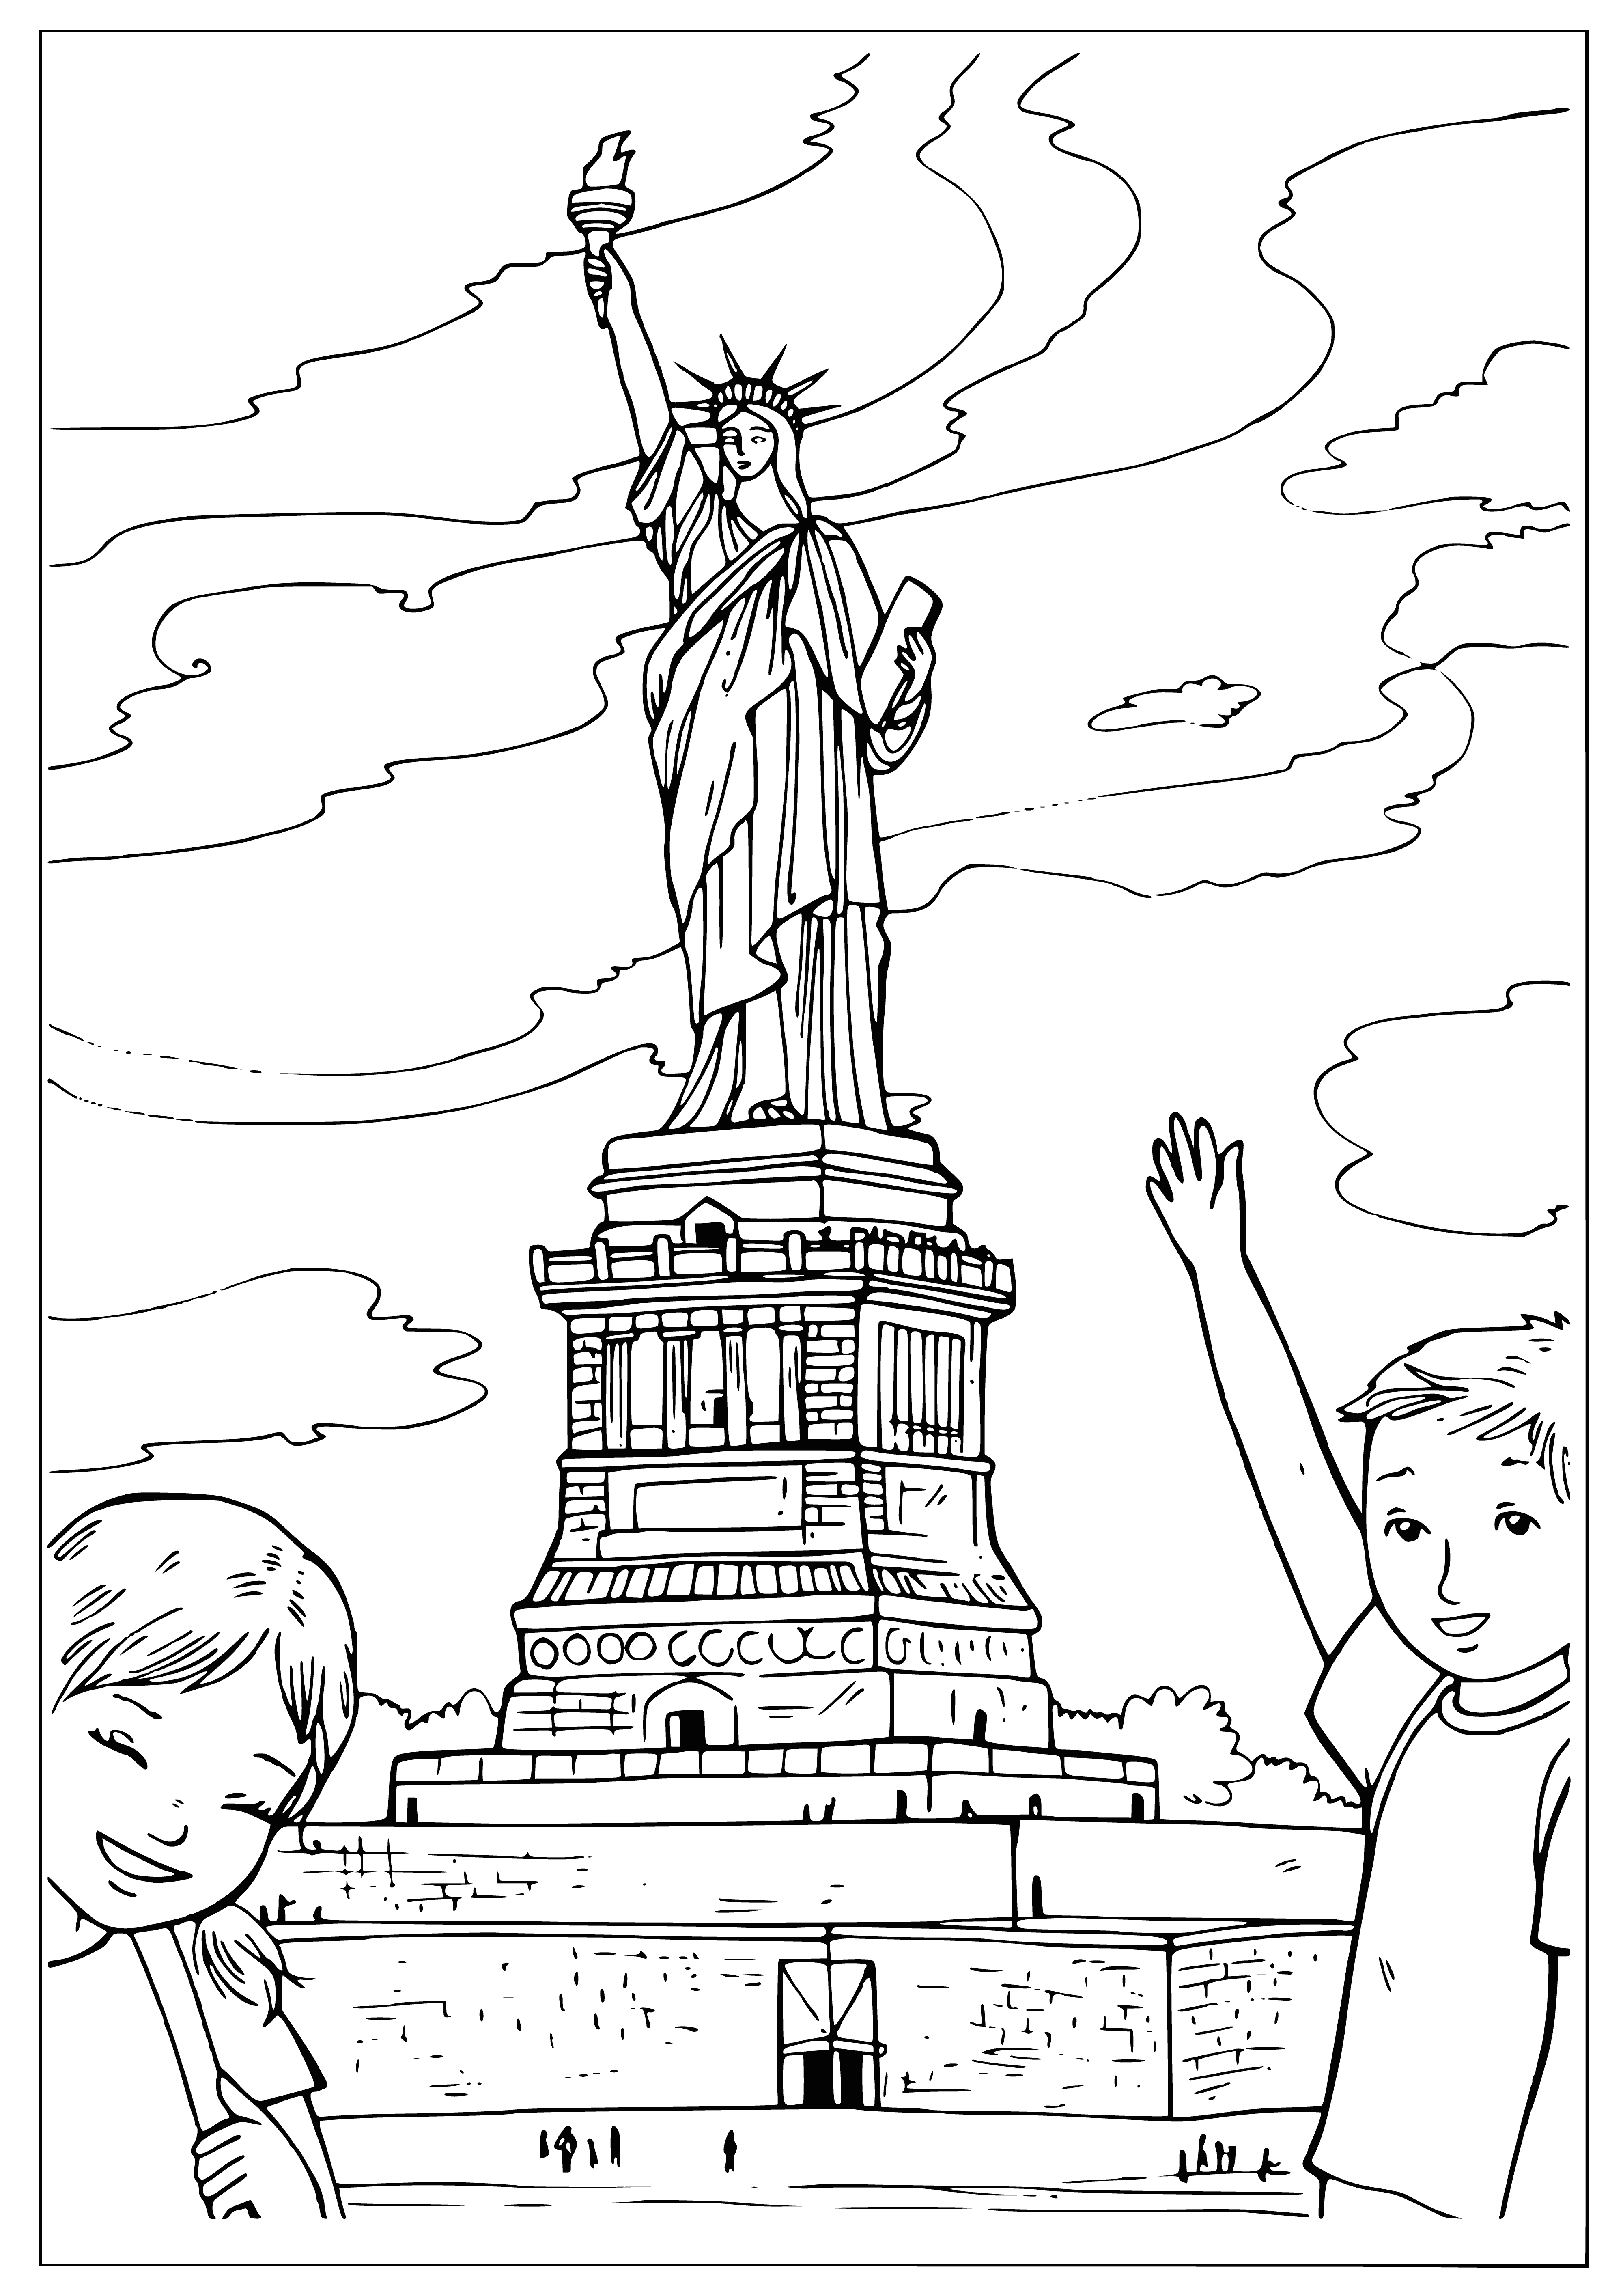 Statue of Liberty. USA coloring page